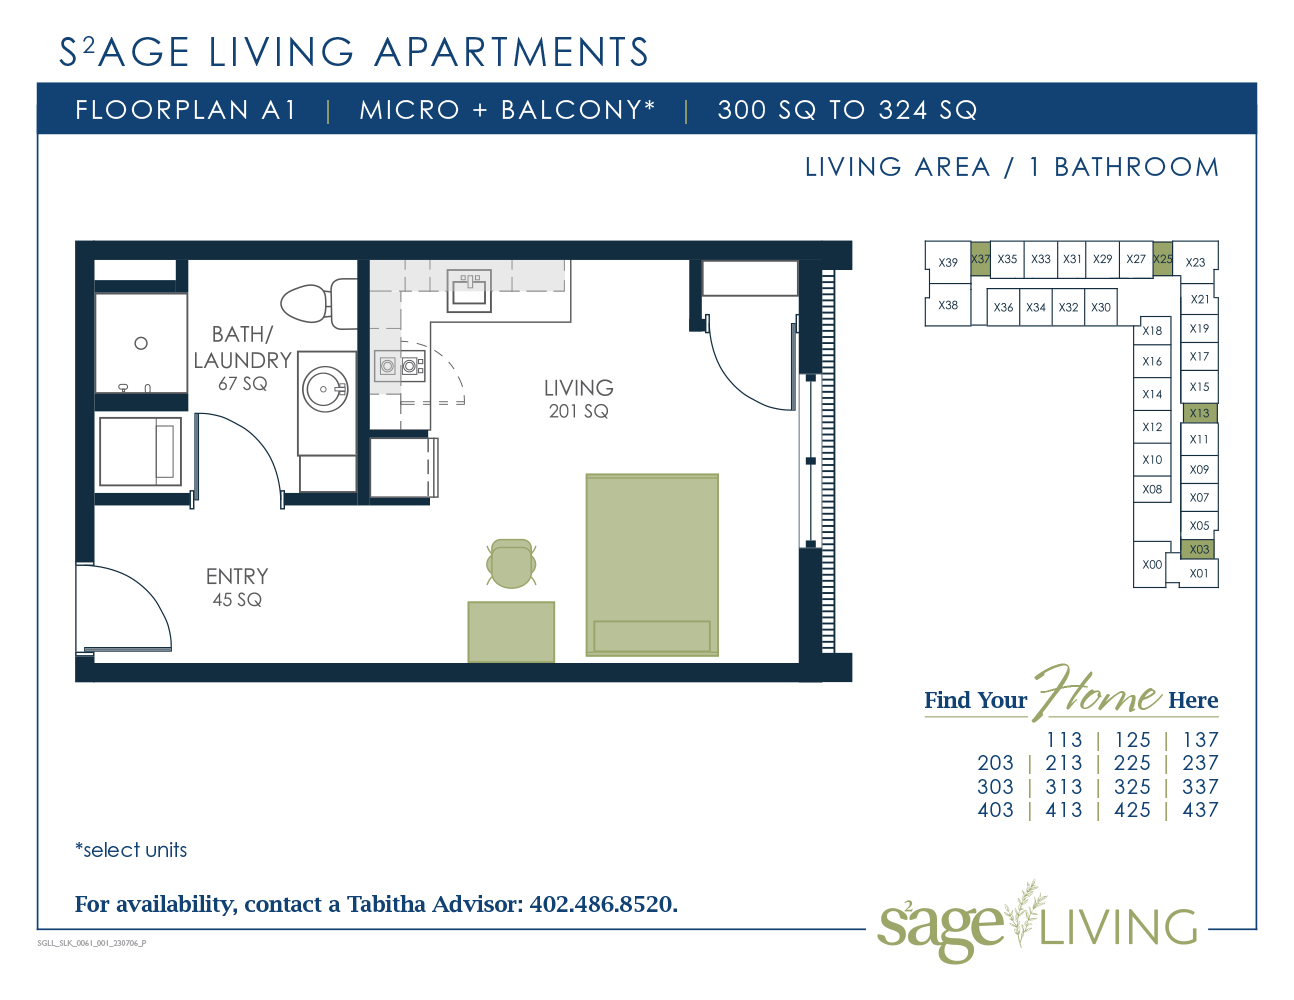 S2age Living Floor Plan, Apartment A1